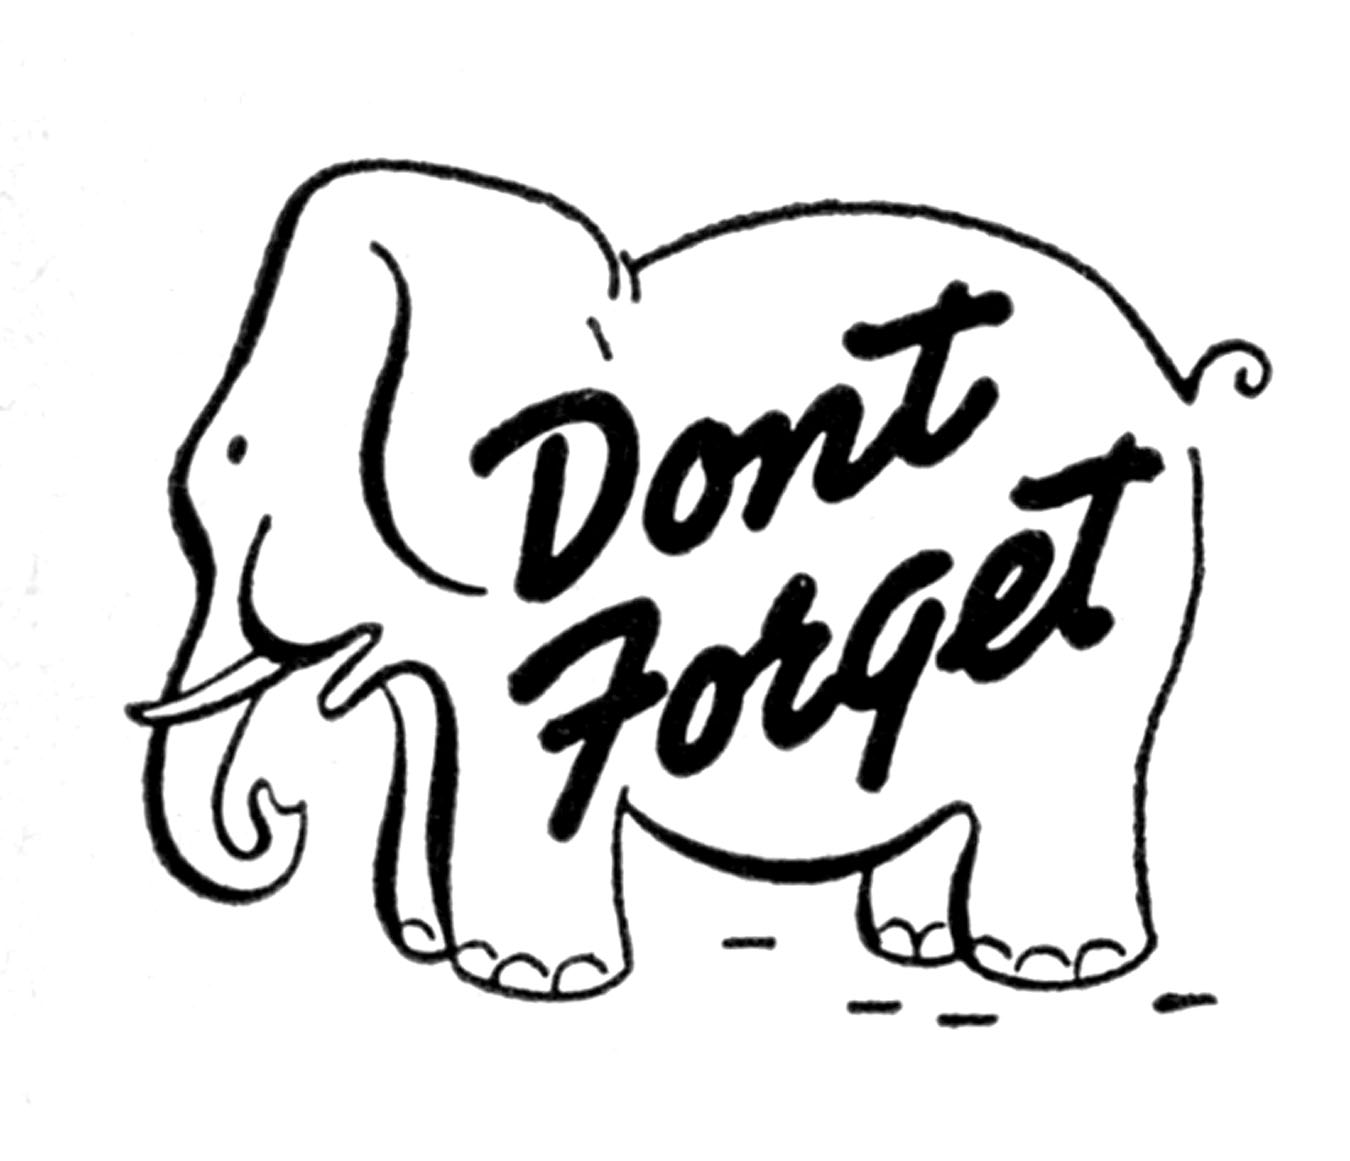 clipart reminder graphics - photo #10